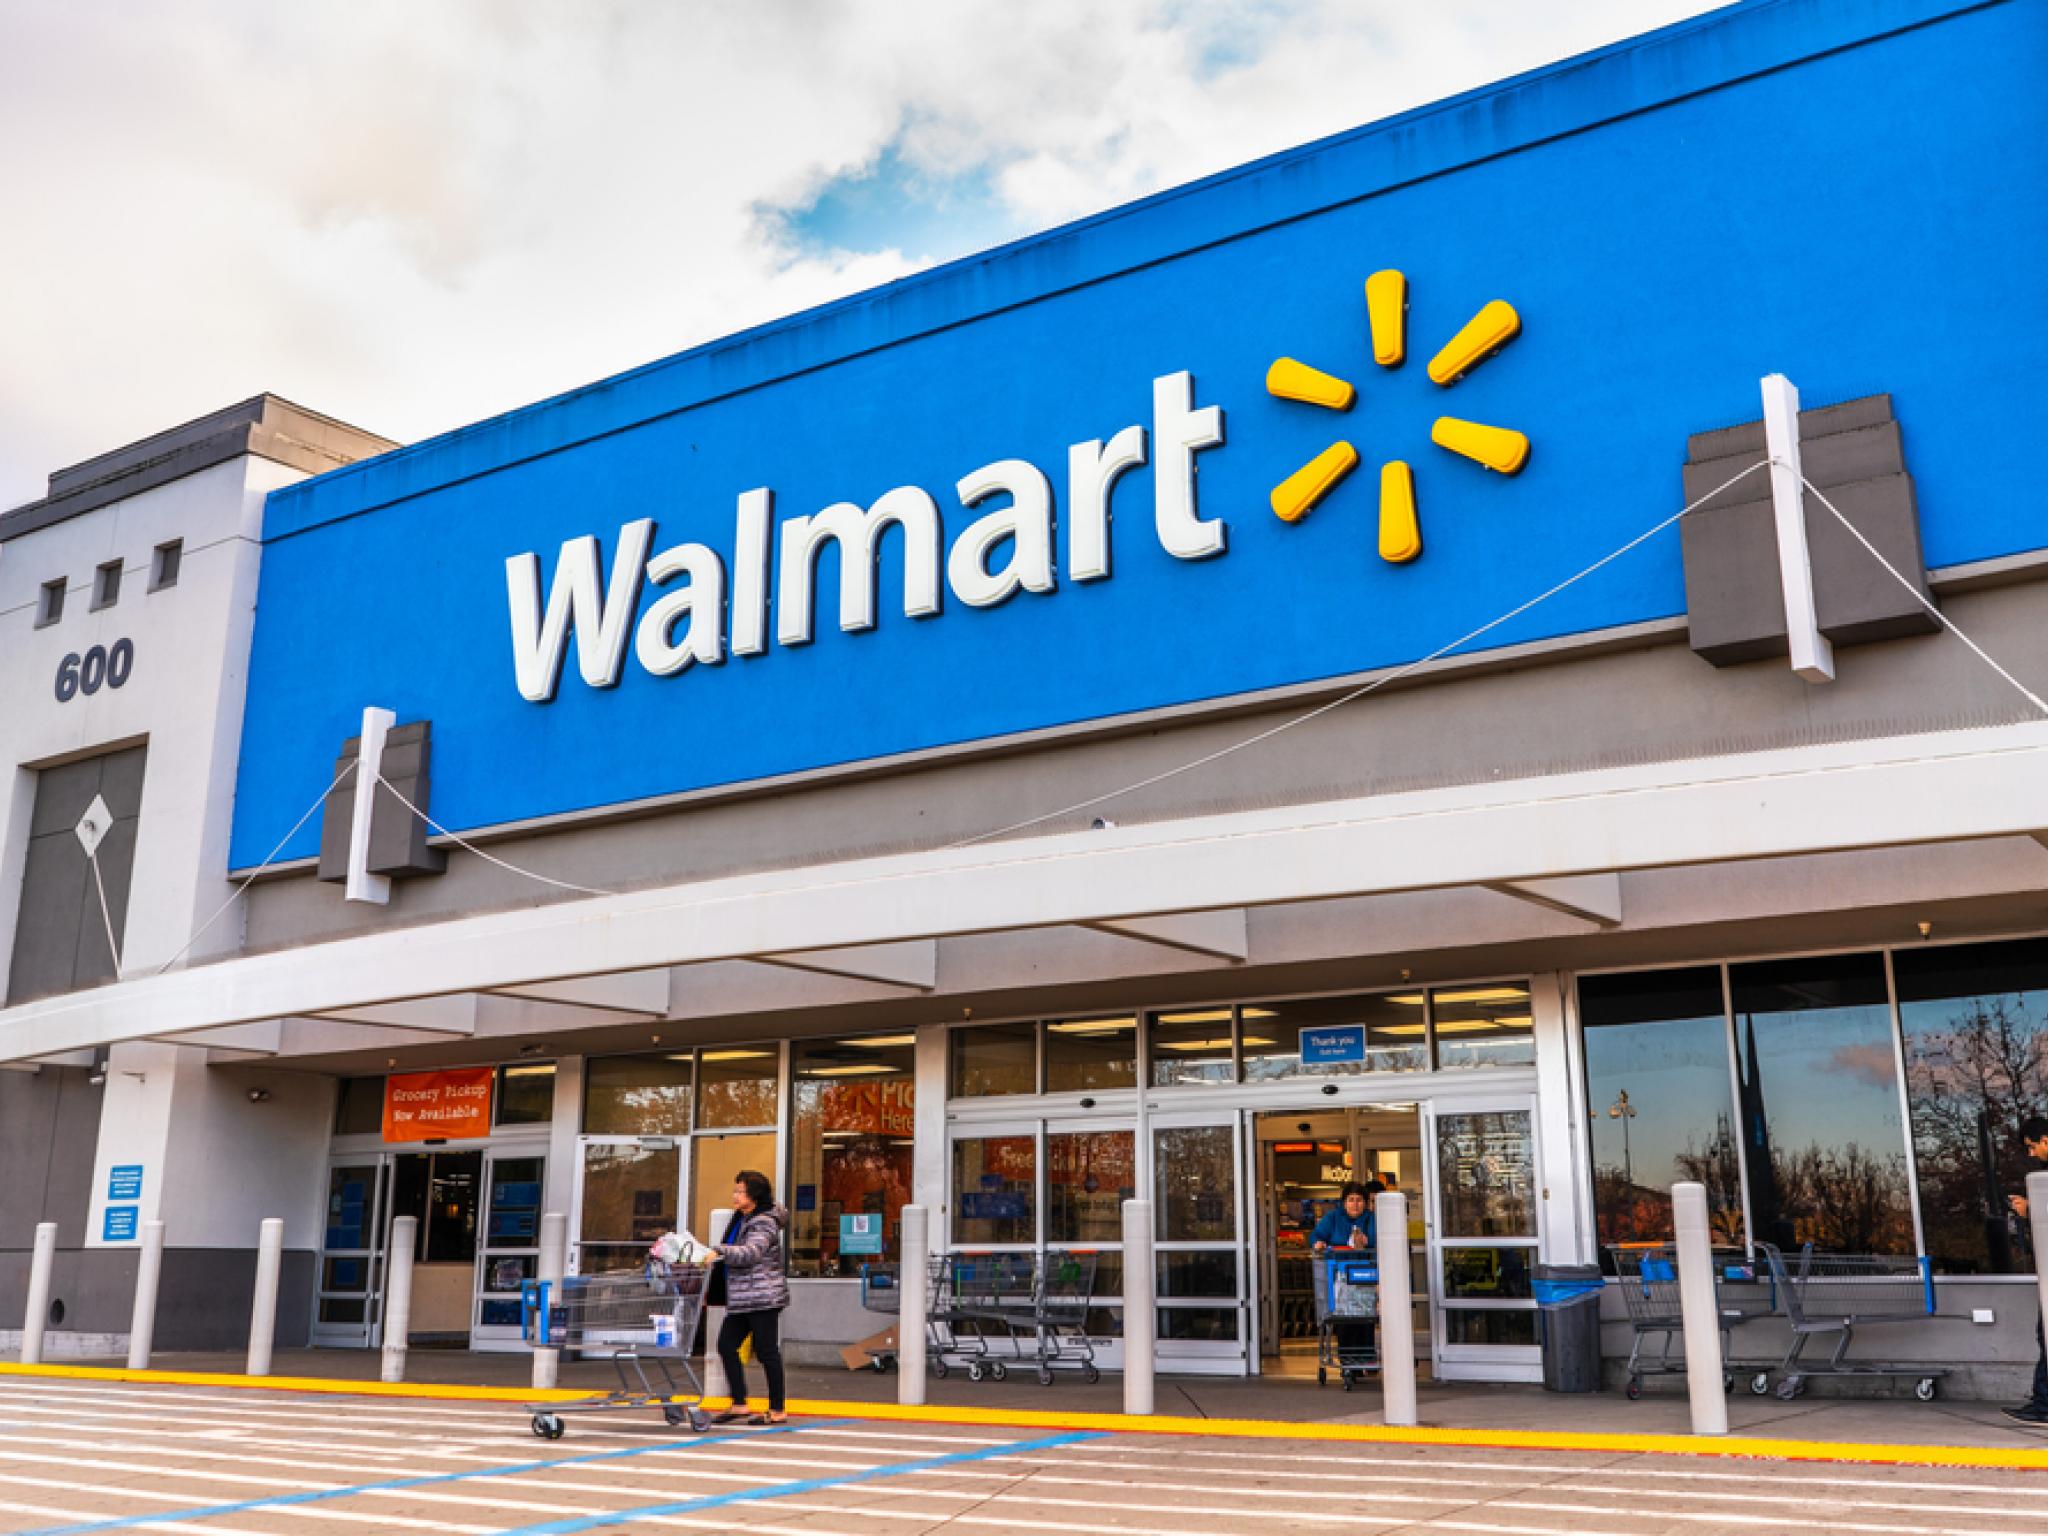  walmarts-e-commerce-profitability-new-product-lines-impress-analysts-after-shareholder-event 